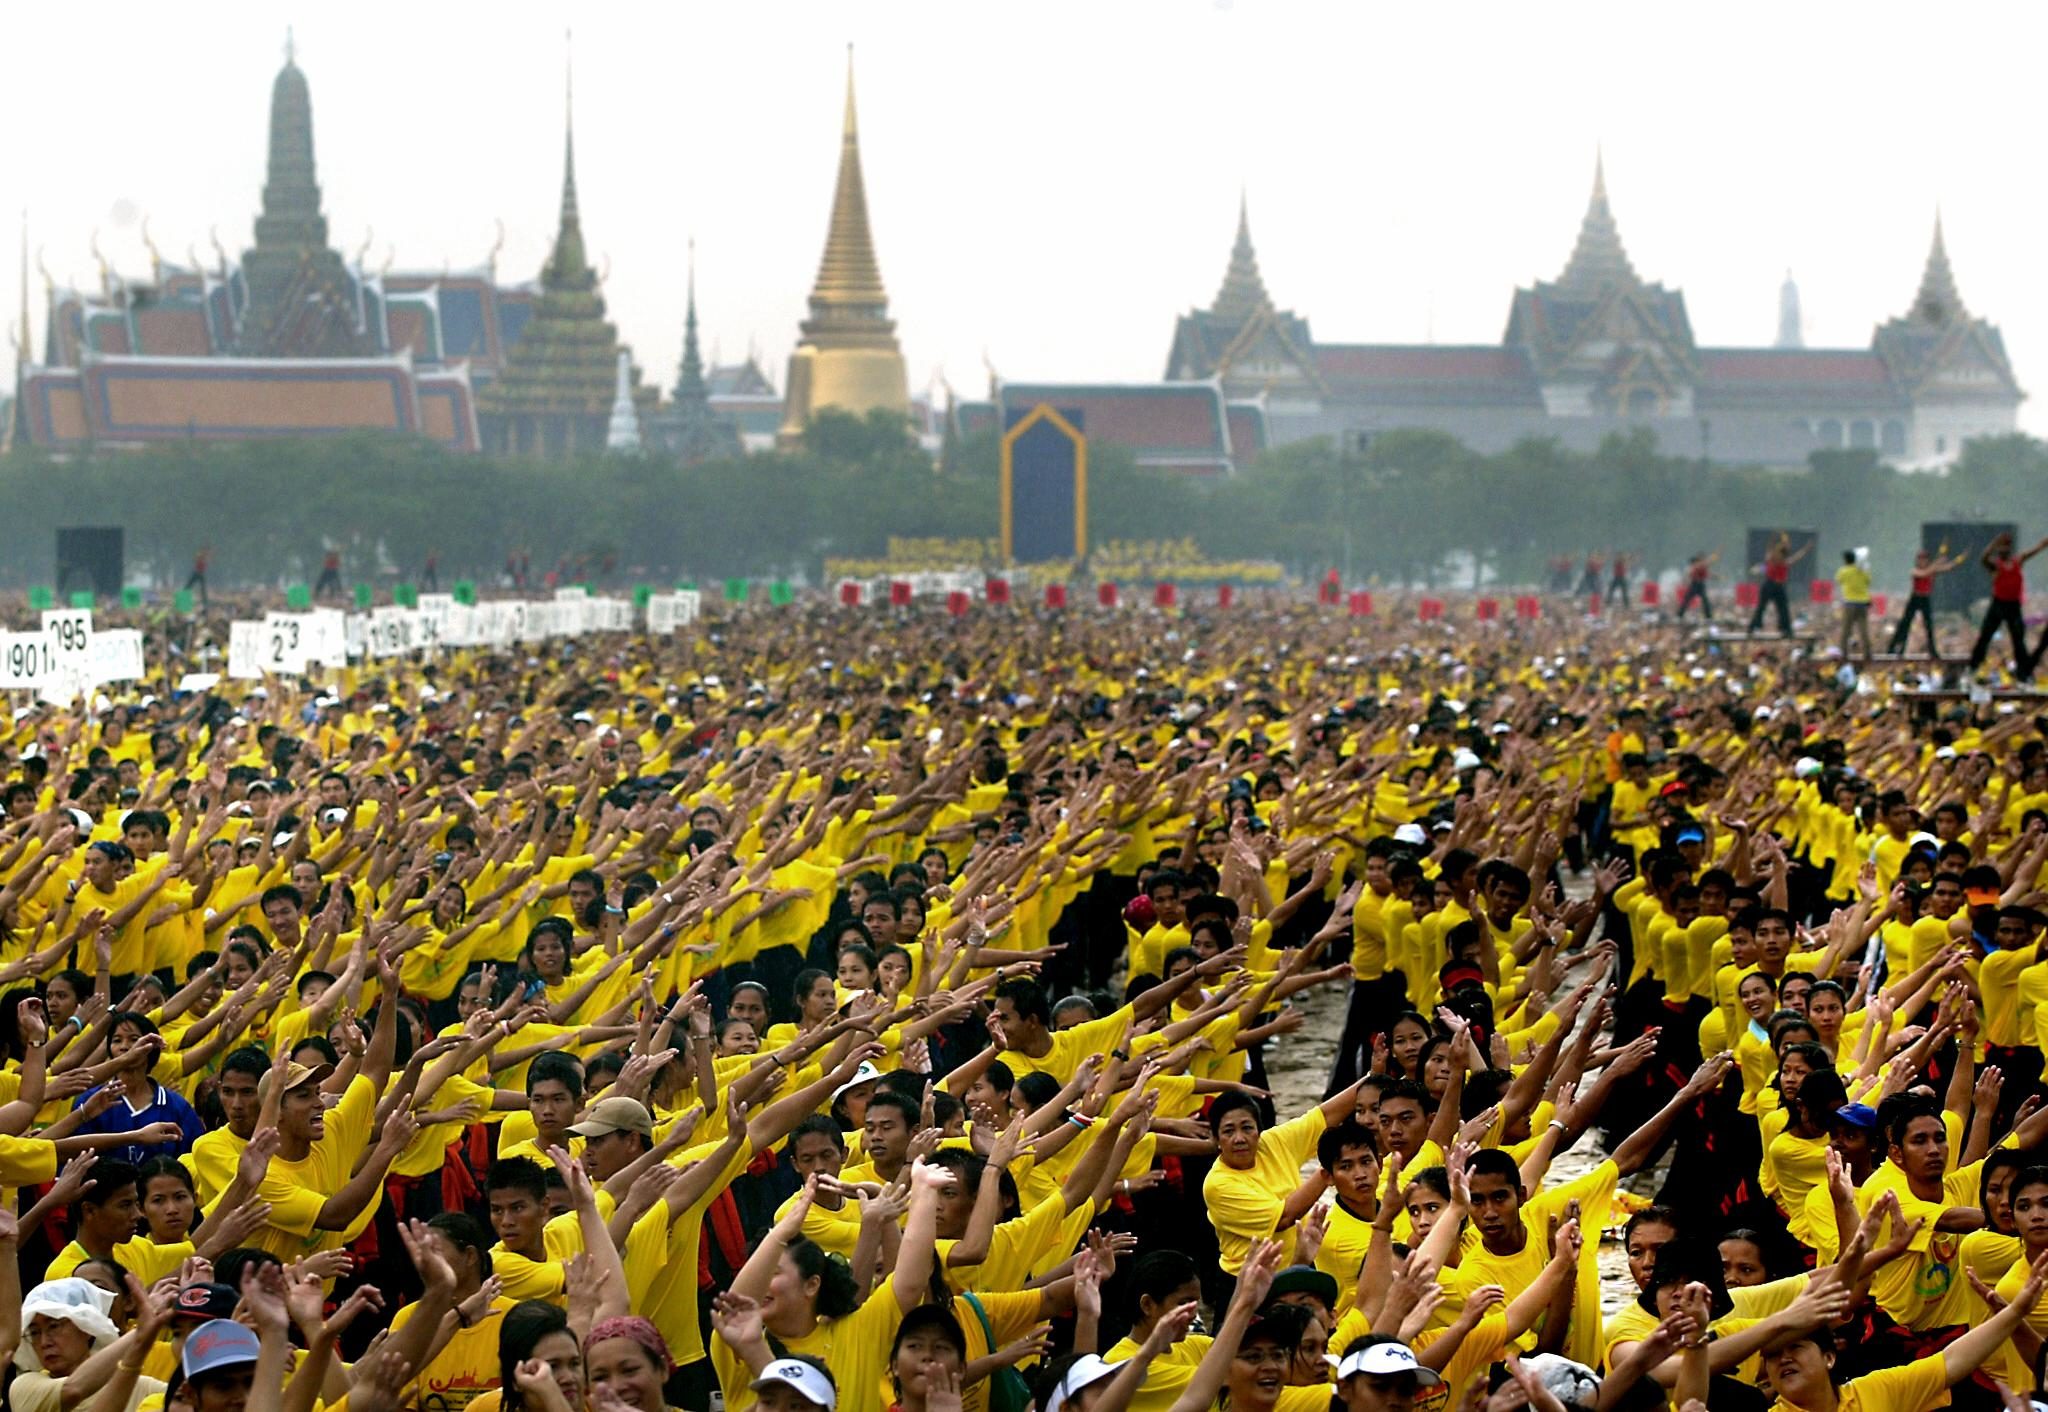 A massive crowd participates in an aerobics session near the Royal Palace in Bangkok, 23 November 2002, as part of a global movement for health aimed at being the world's largest health festival and led by Thailand's Prime Minister Thaksin Shinawatra. The massive outdoor aerobics exercise session led by Thaksin and involving more than 50,000 people aims to break the world record. The event joins yearlong national efforts around the world to take further this year's World Health Day theme, "Move for Health". AFP PHOTO/Stephen SHAVER / AFP PHOTO / STEPHEN SHAVER